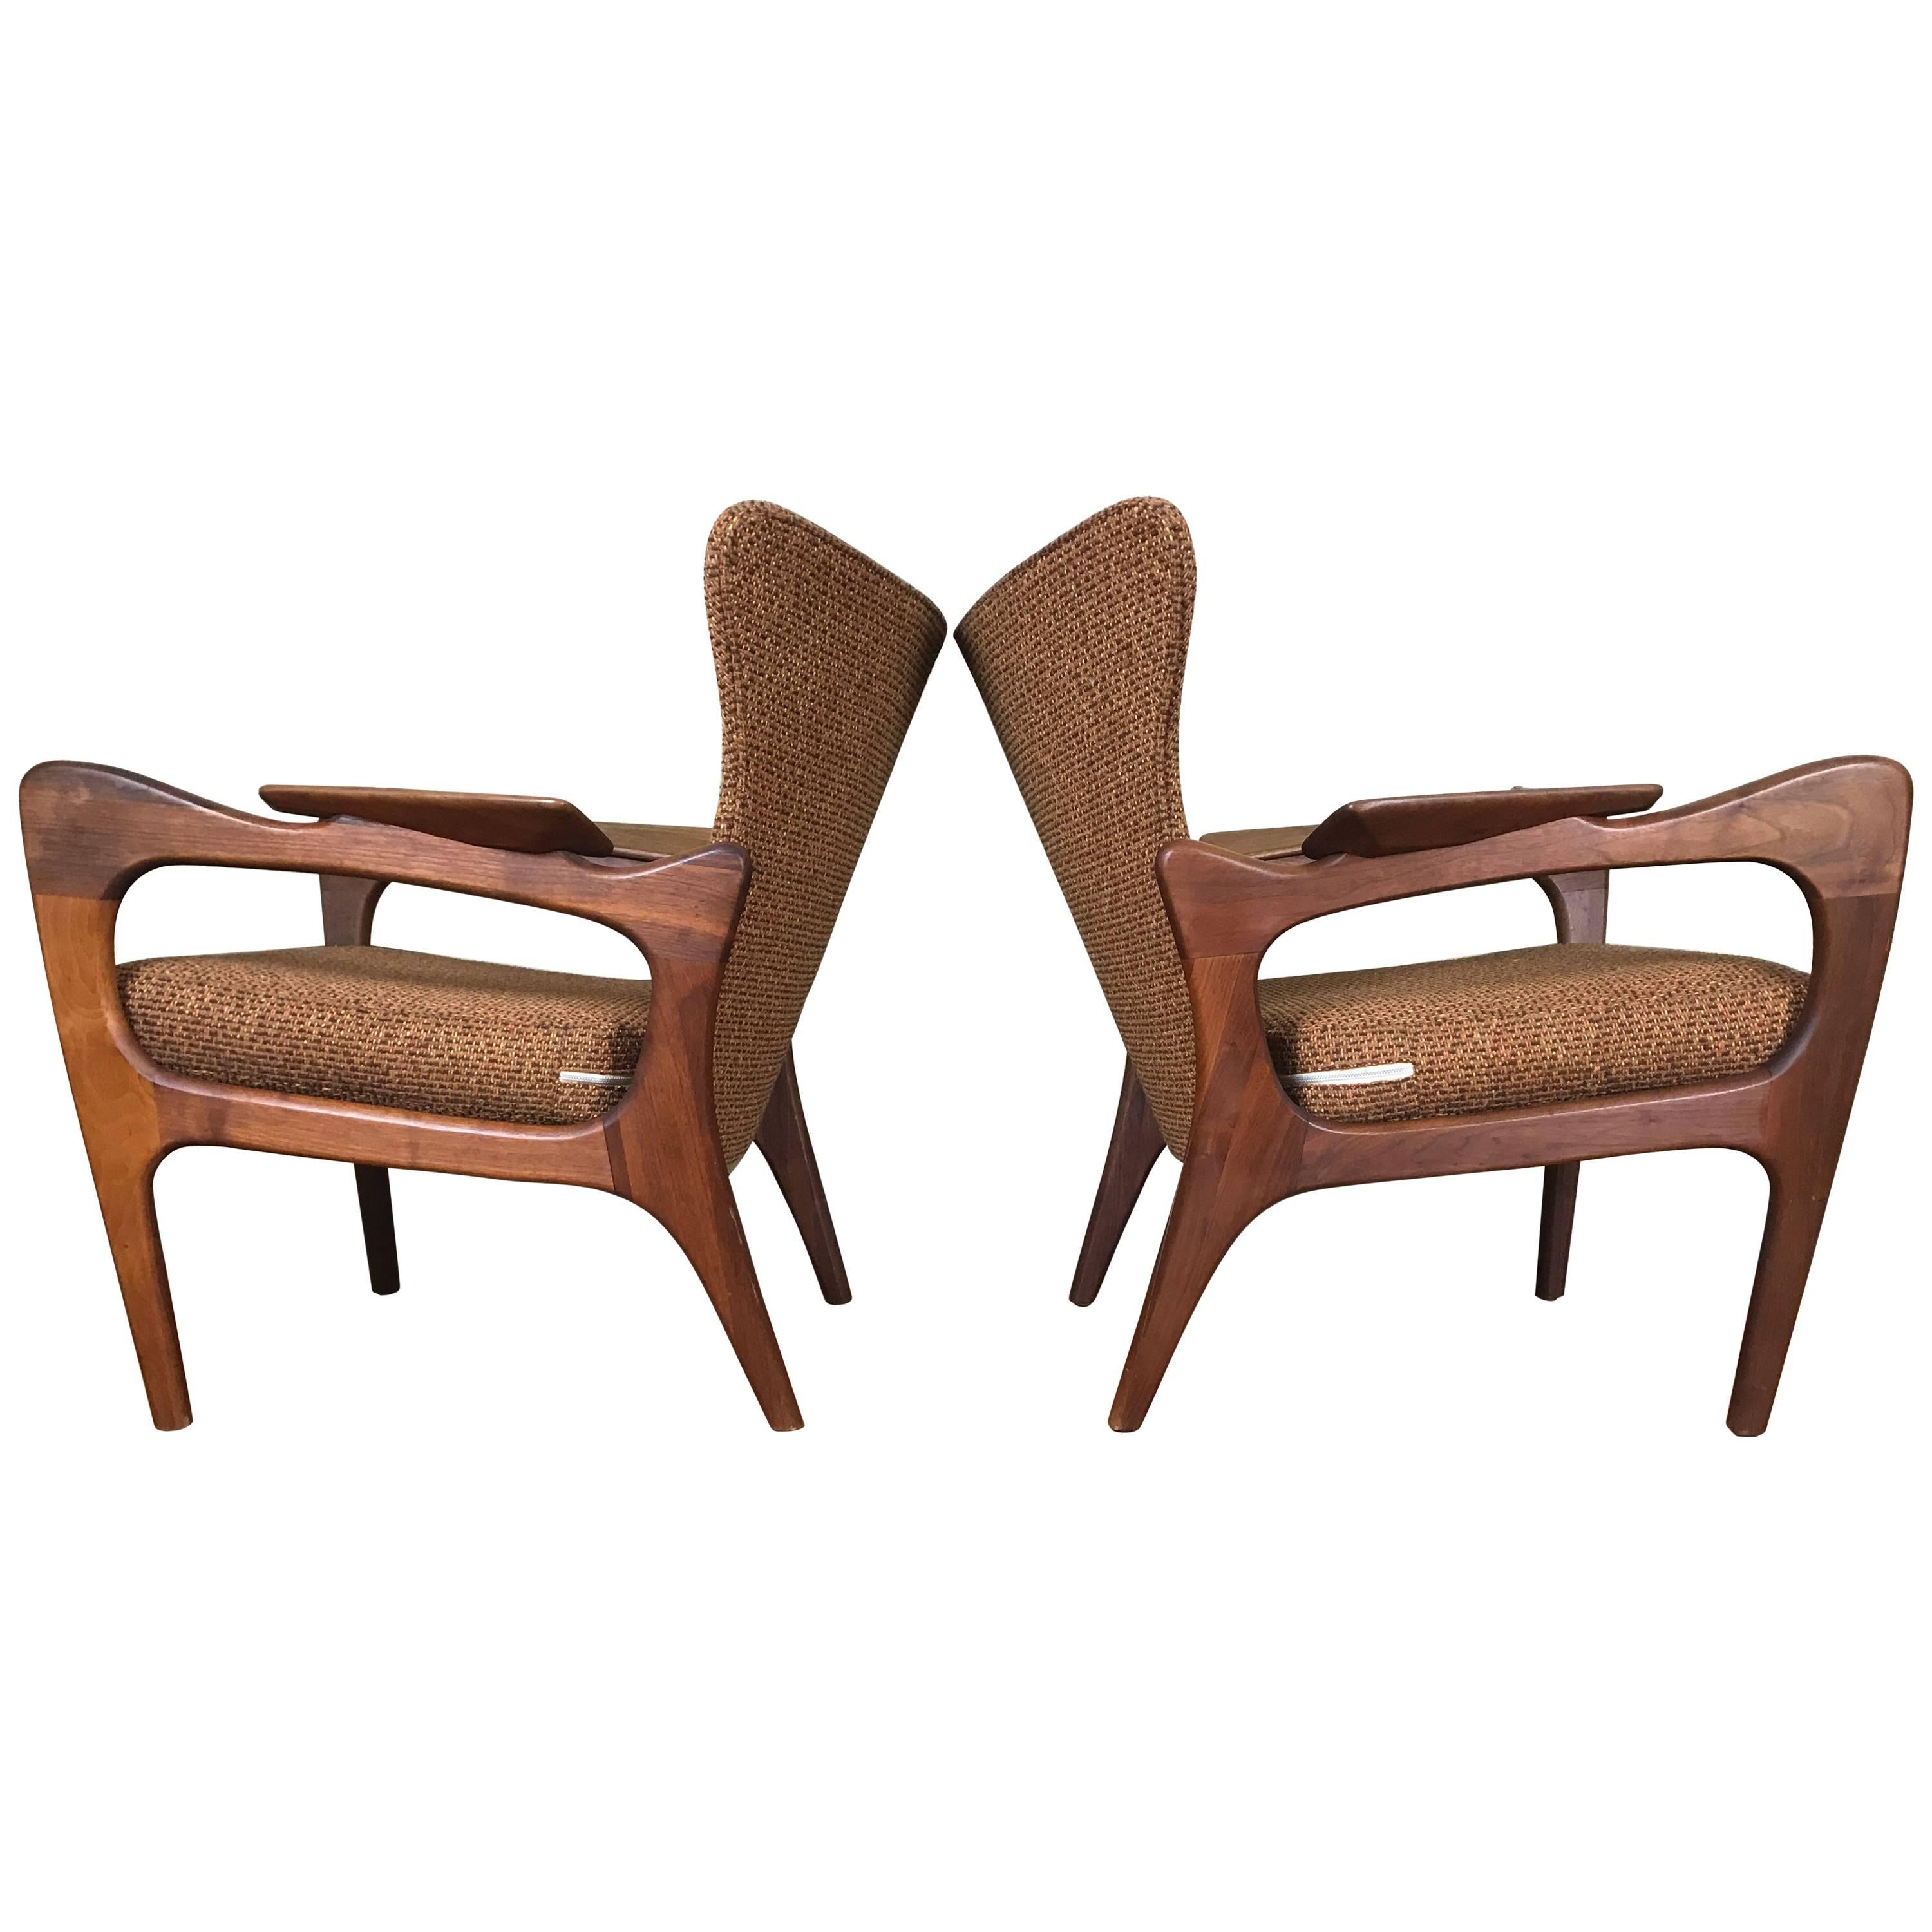 Pair of Sculptural Wingback Lounge Chairs by Adrian Pearsall, Craft Associates